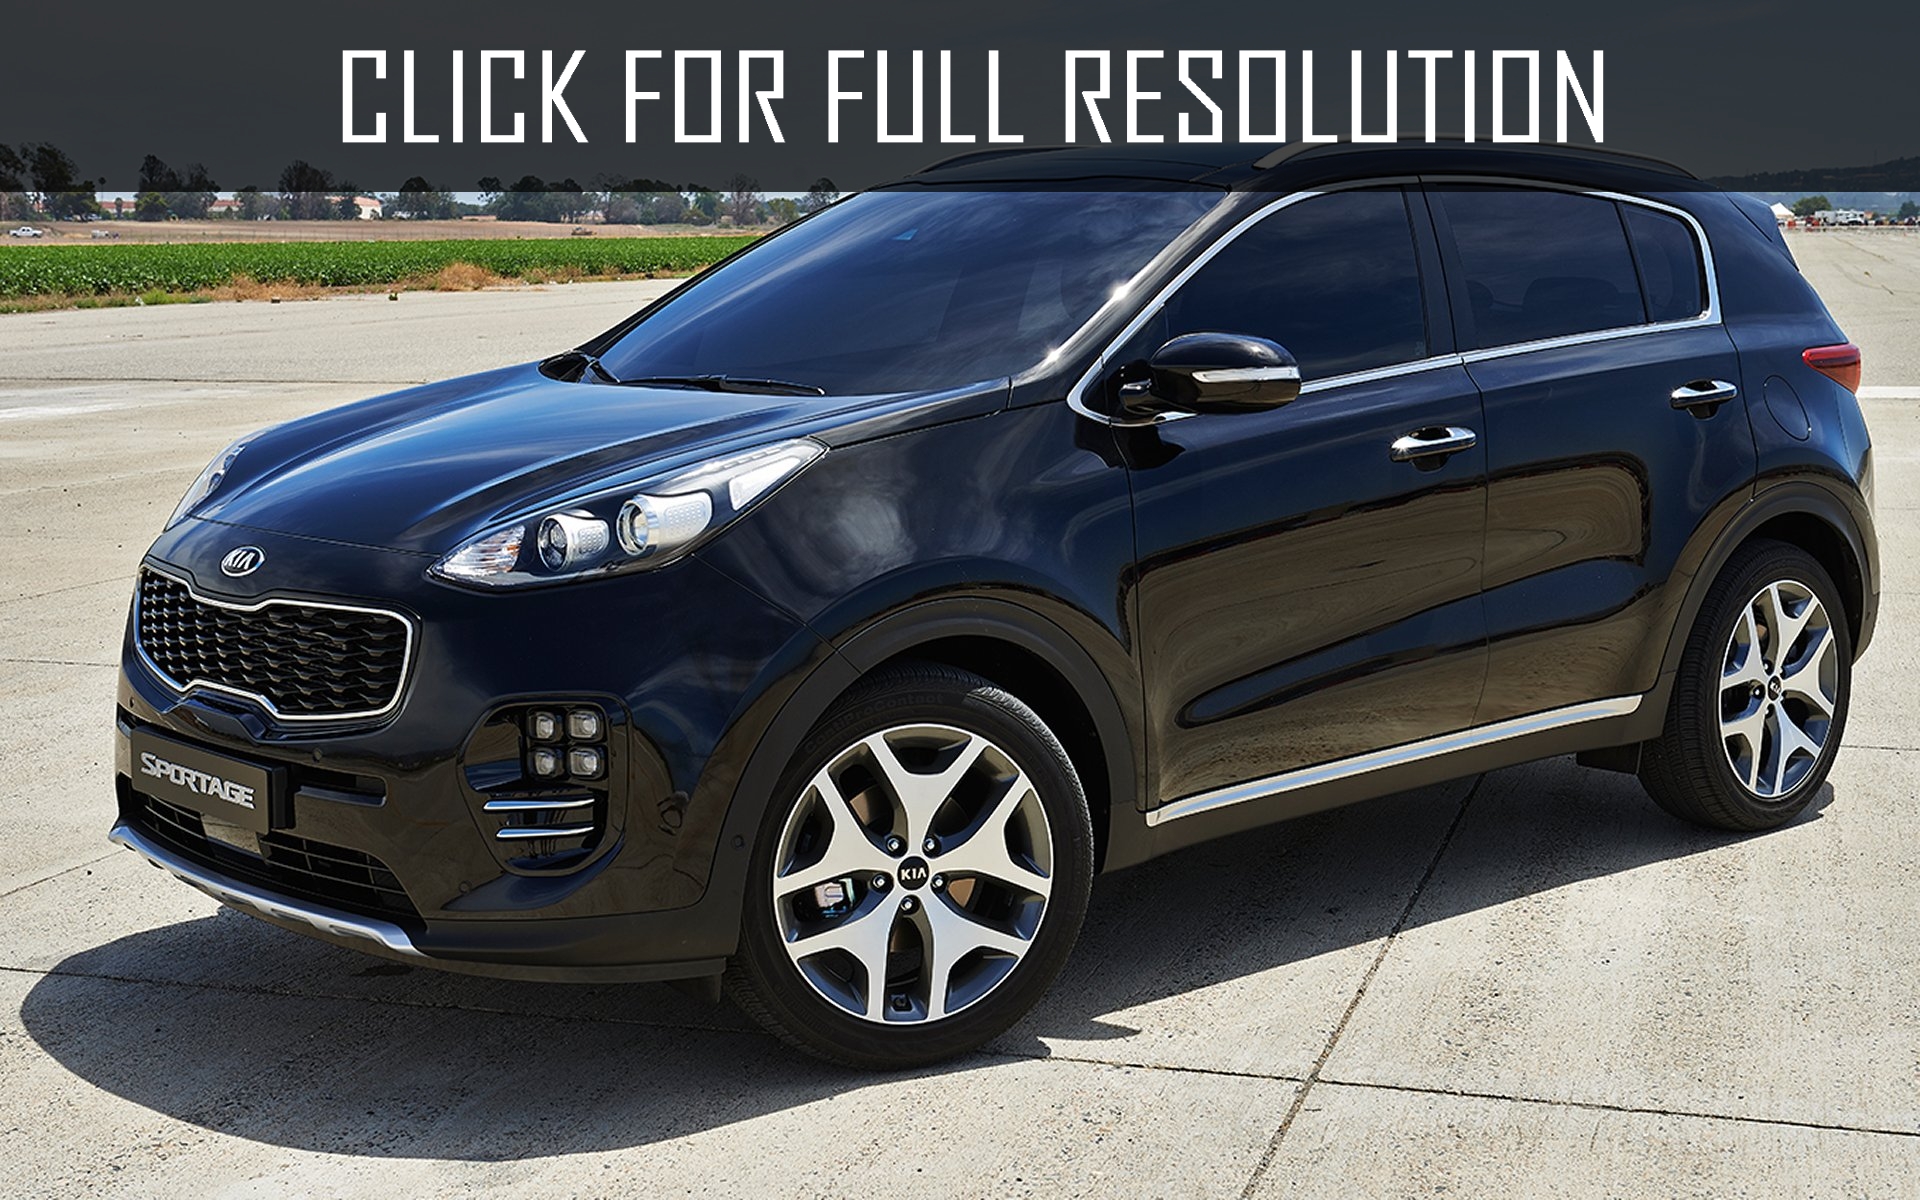 2017 Kia Sportage news, reviews, msrp, ratings with